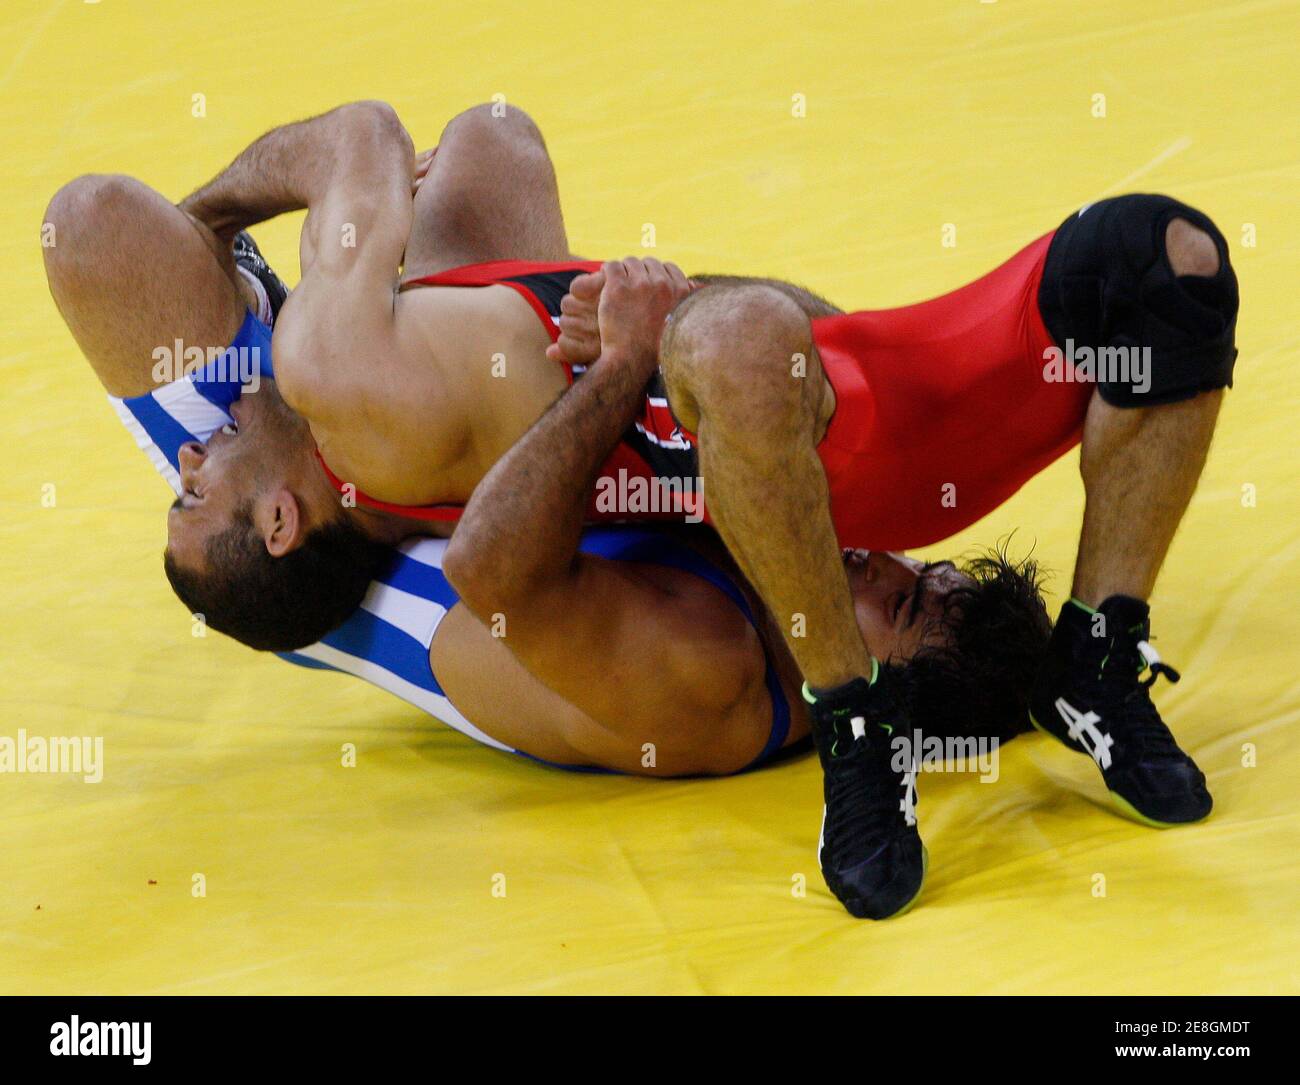 Saleh Emara of Egypt (in red) fights Saeid Abrahimi of Iran during their 96kg men's freestyle wrestling qualification match at the Beijing 2008 Olympic Games August 21, 2008. REUTERS/Oleg Popov (CHINA) Stock Photo